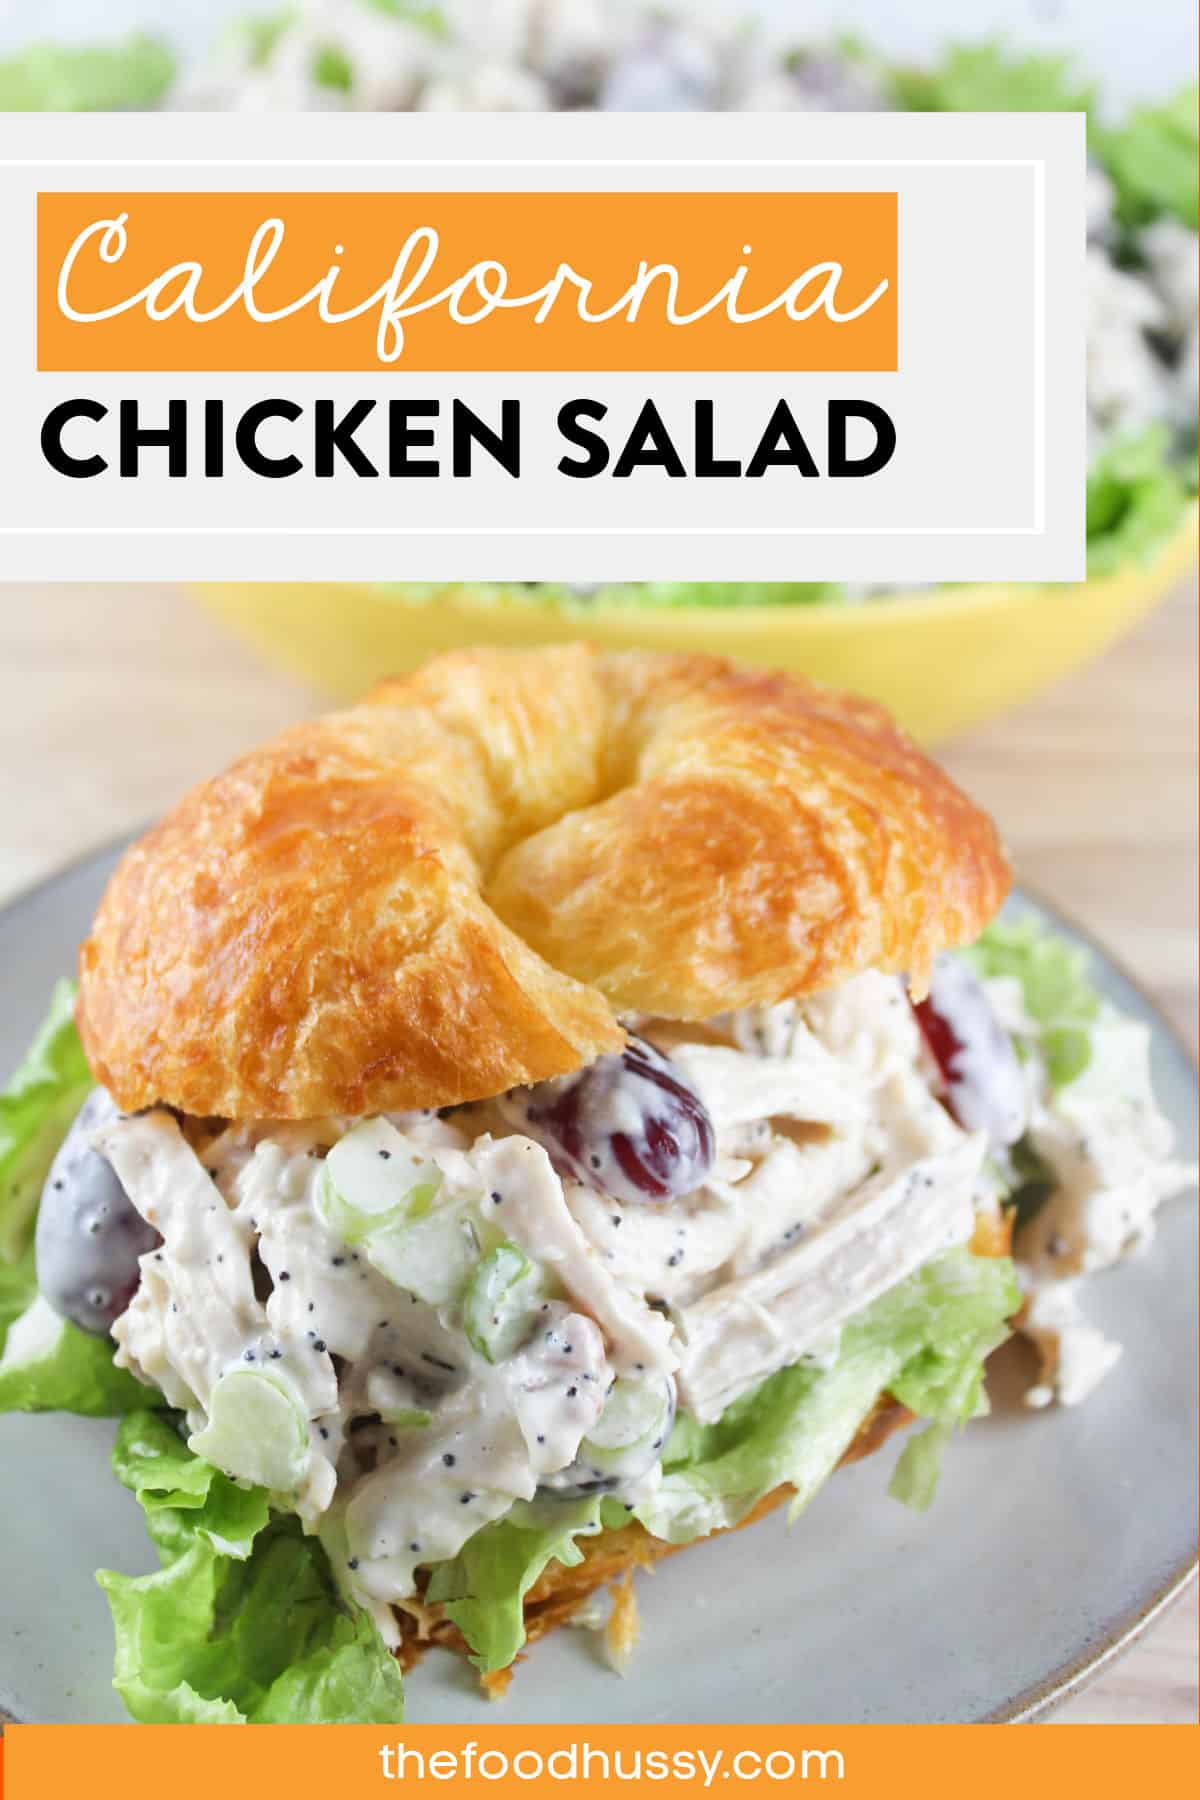 This California Chicken Salad tastes just like the Sonoma Chicken Salad at Whole Foods! It's creamy and crunchy all at the same time with diced celery, red grapes and chopped pecans!
 via @foodhussy